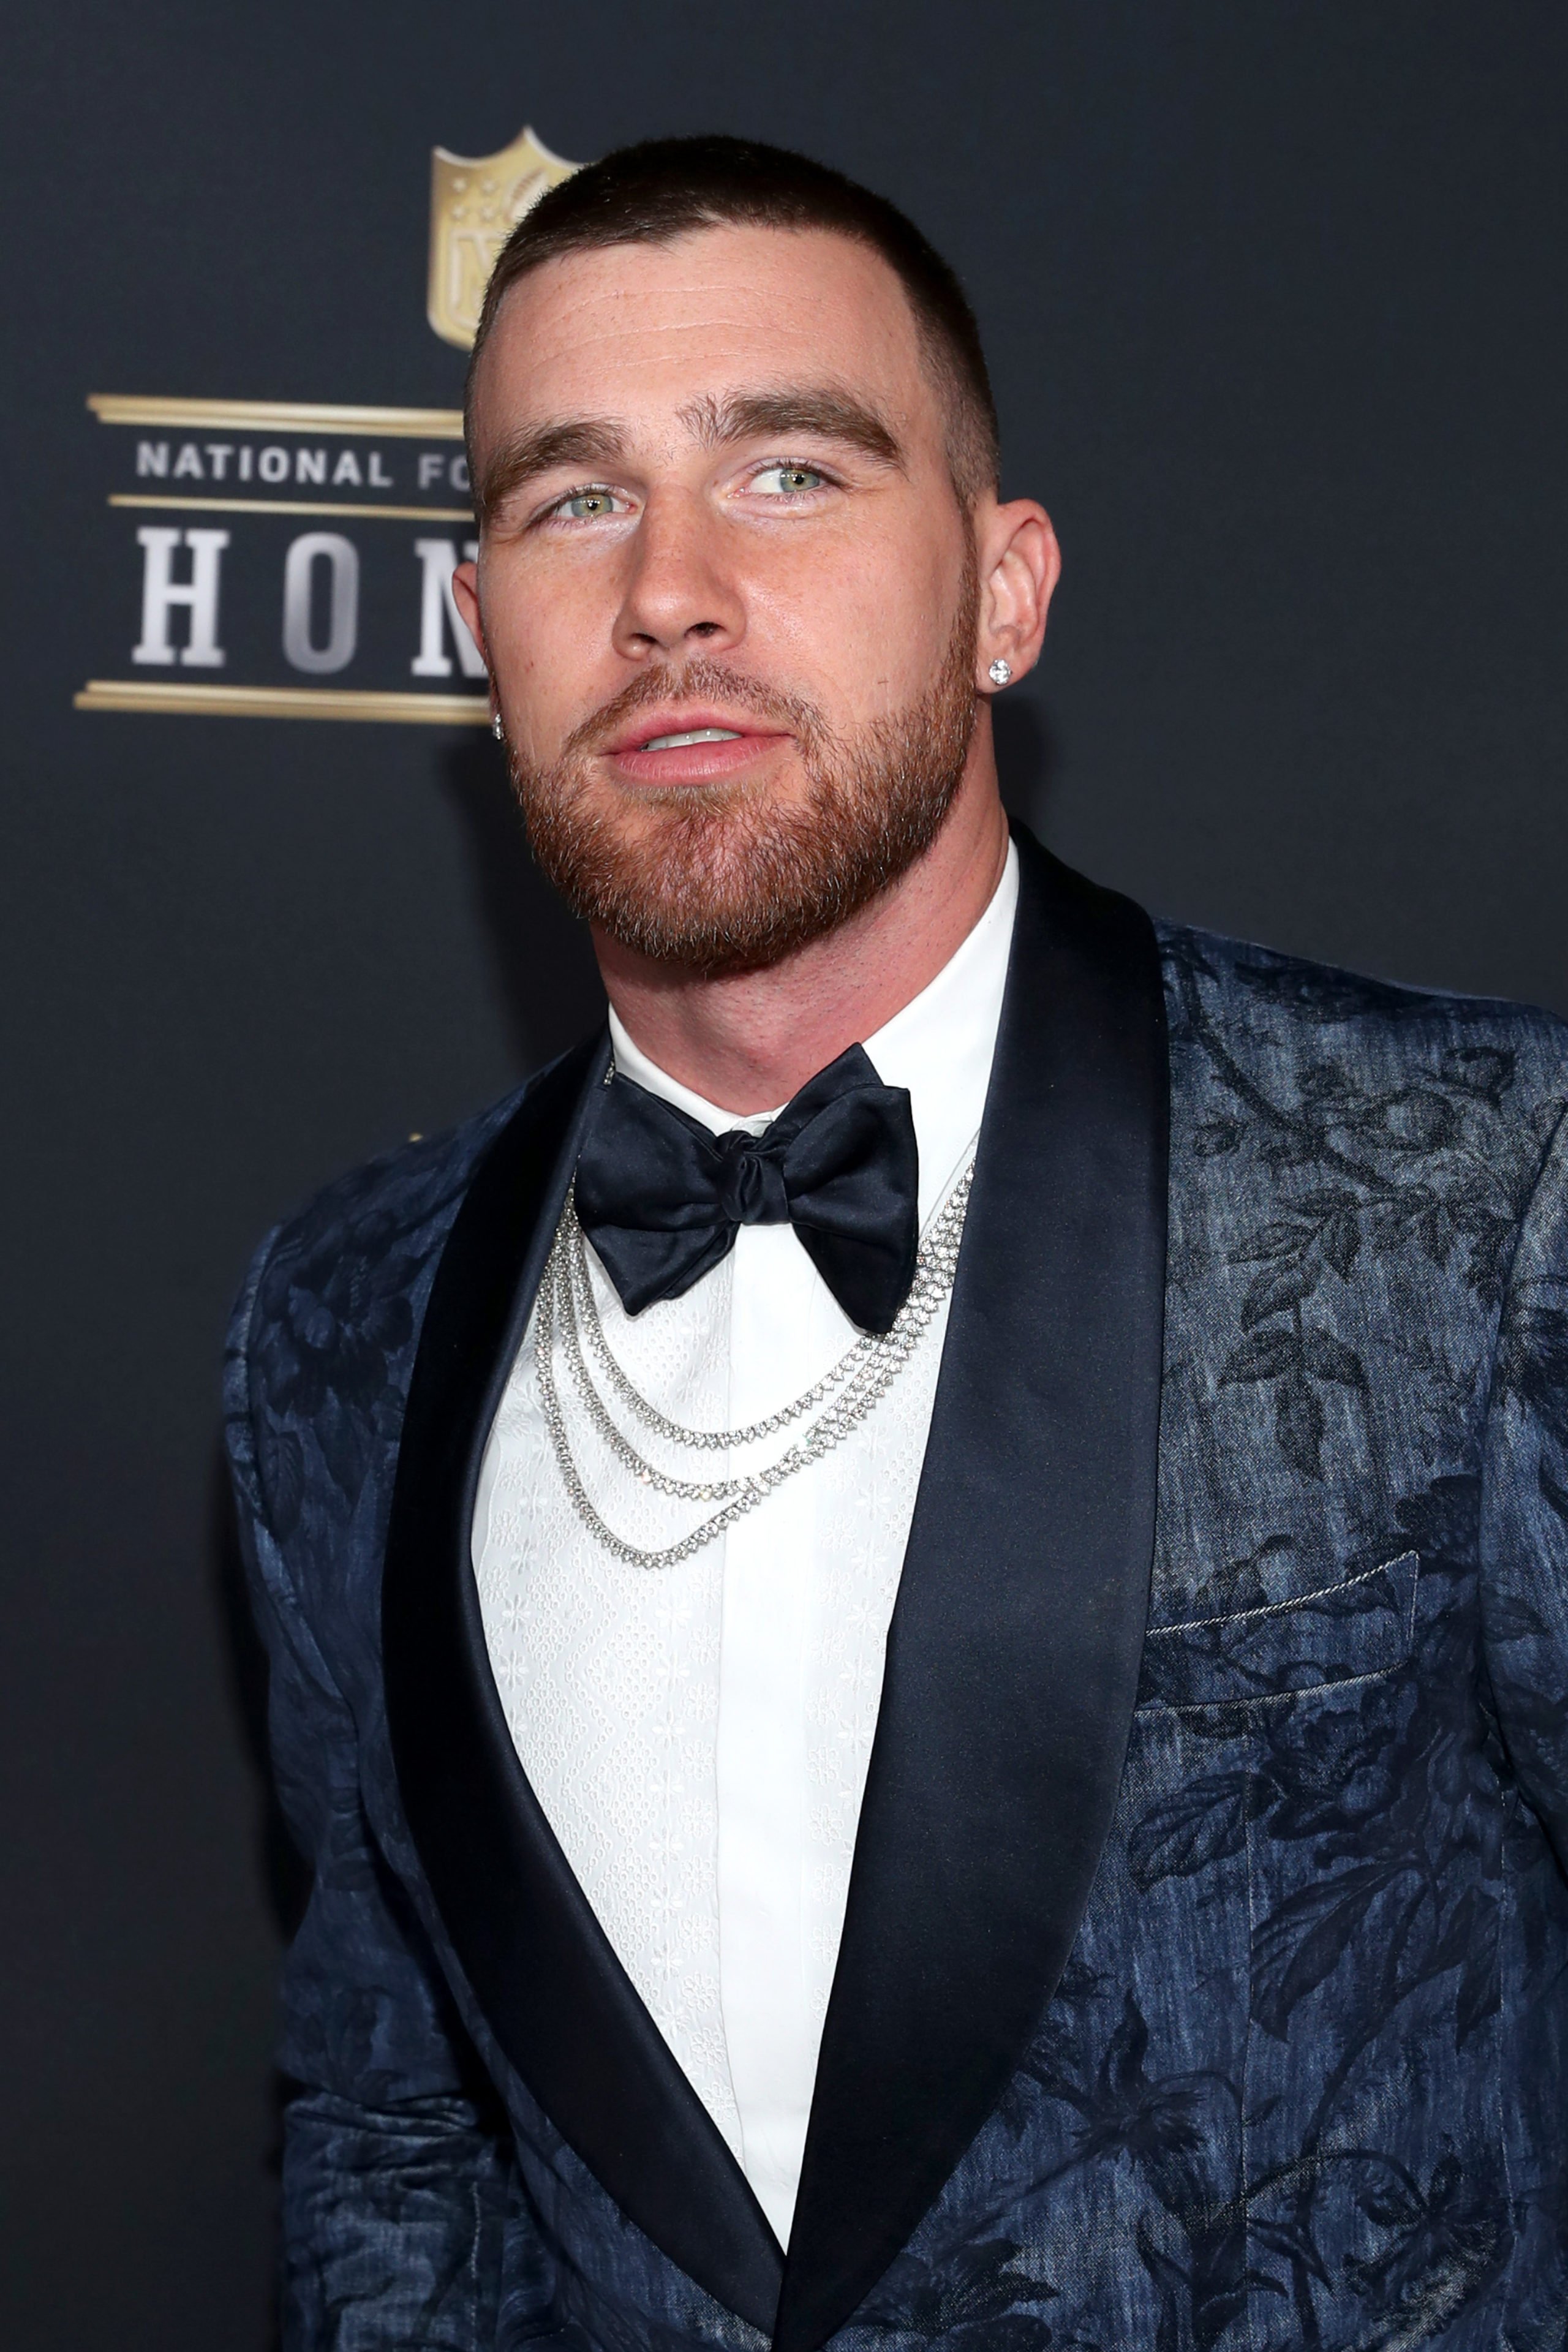 MINNEAPOLIS, MN - FEBRUARY 03: NFL Player Travis Kelce attends the NFL Honors at University of Minnesota on February 3, 2018 in Minneapolis, Minnesota. Christopher Polk/Getty Images